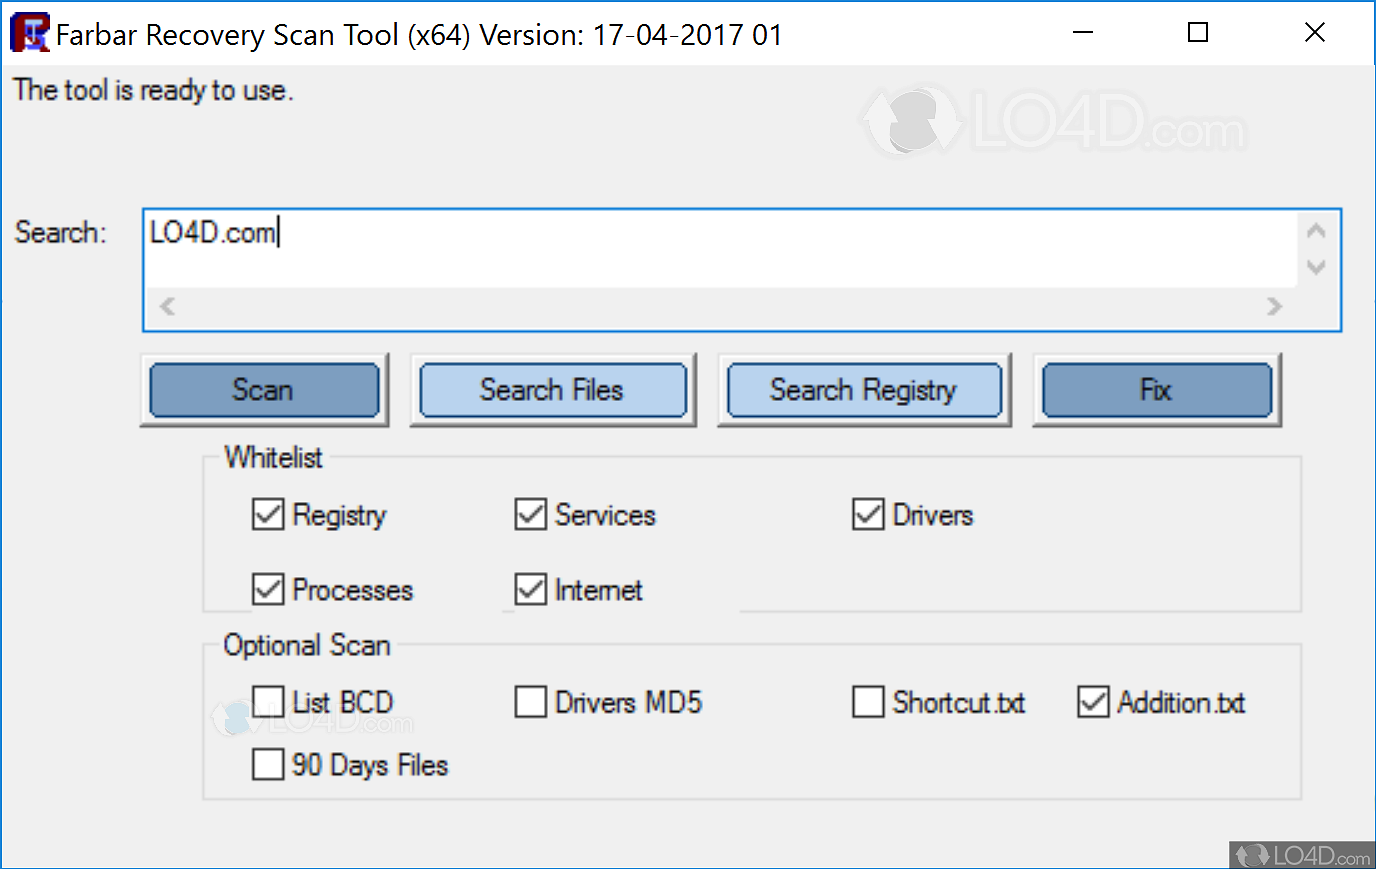 how to use farbar recovery scan tool